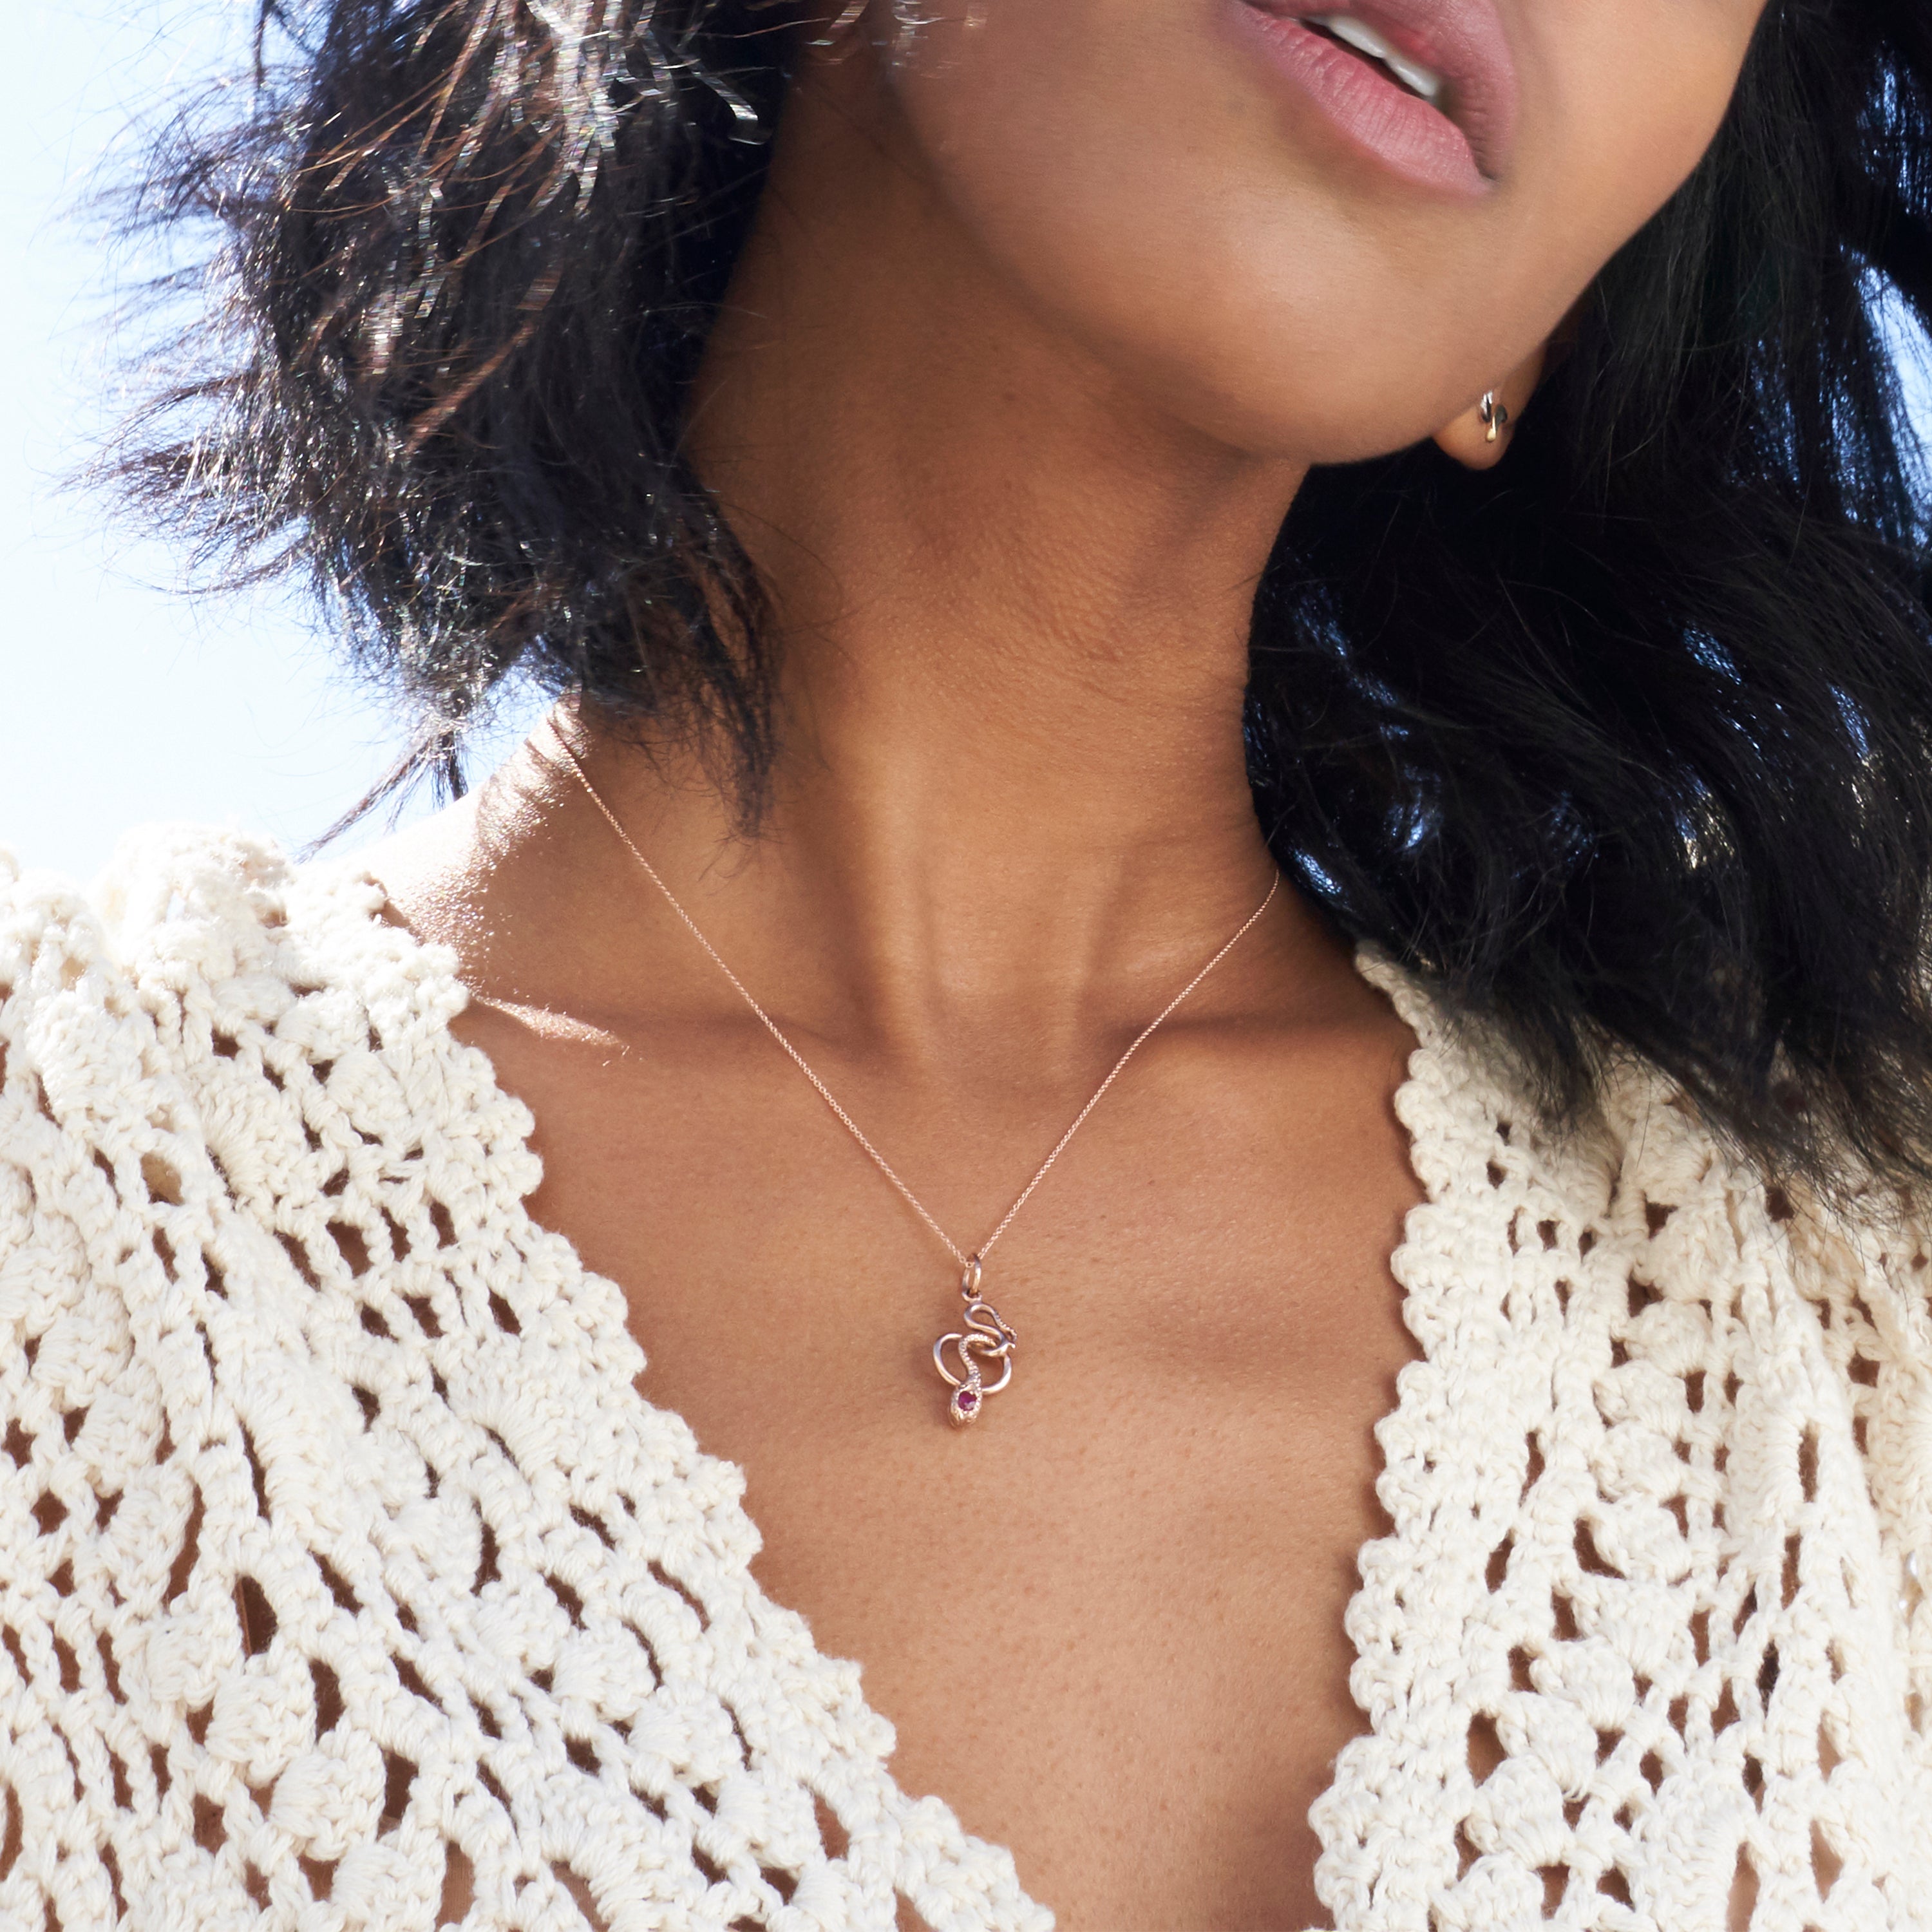 The F&B Rose Gold Snake Charmer Necklace